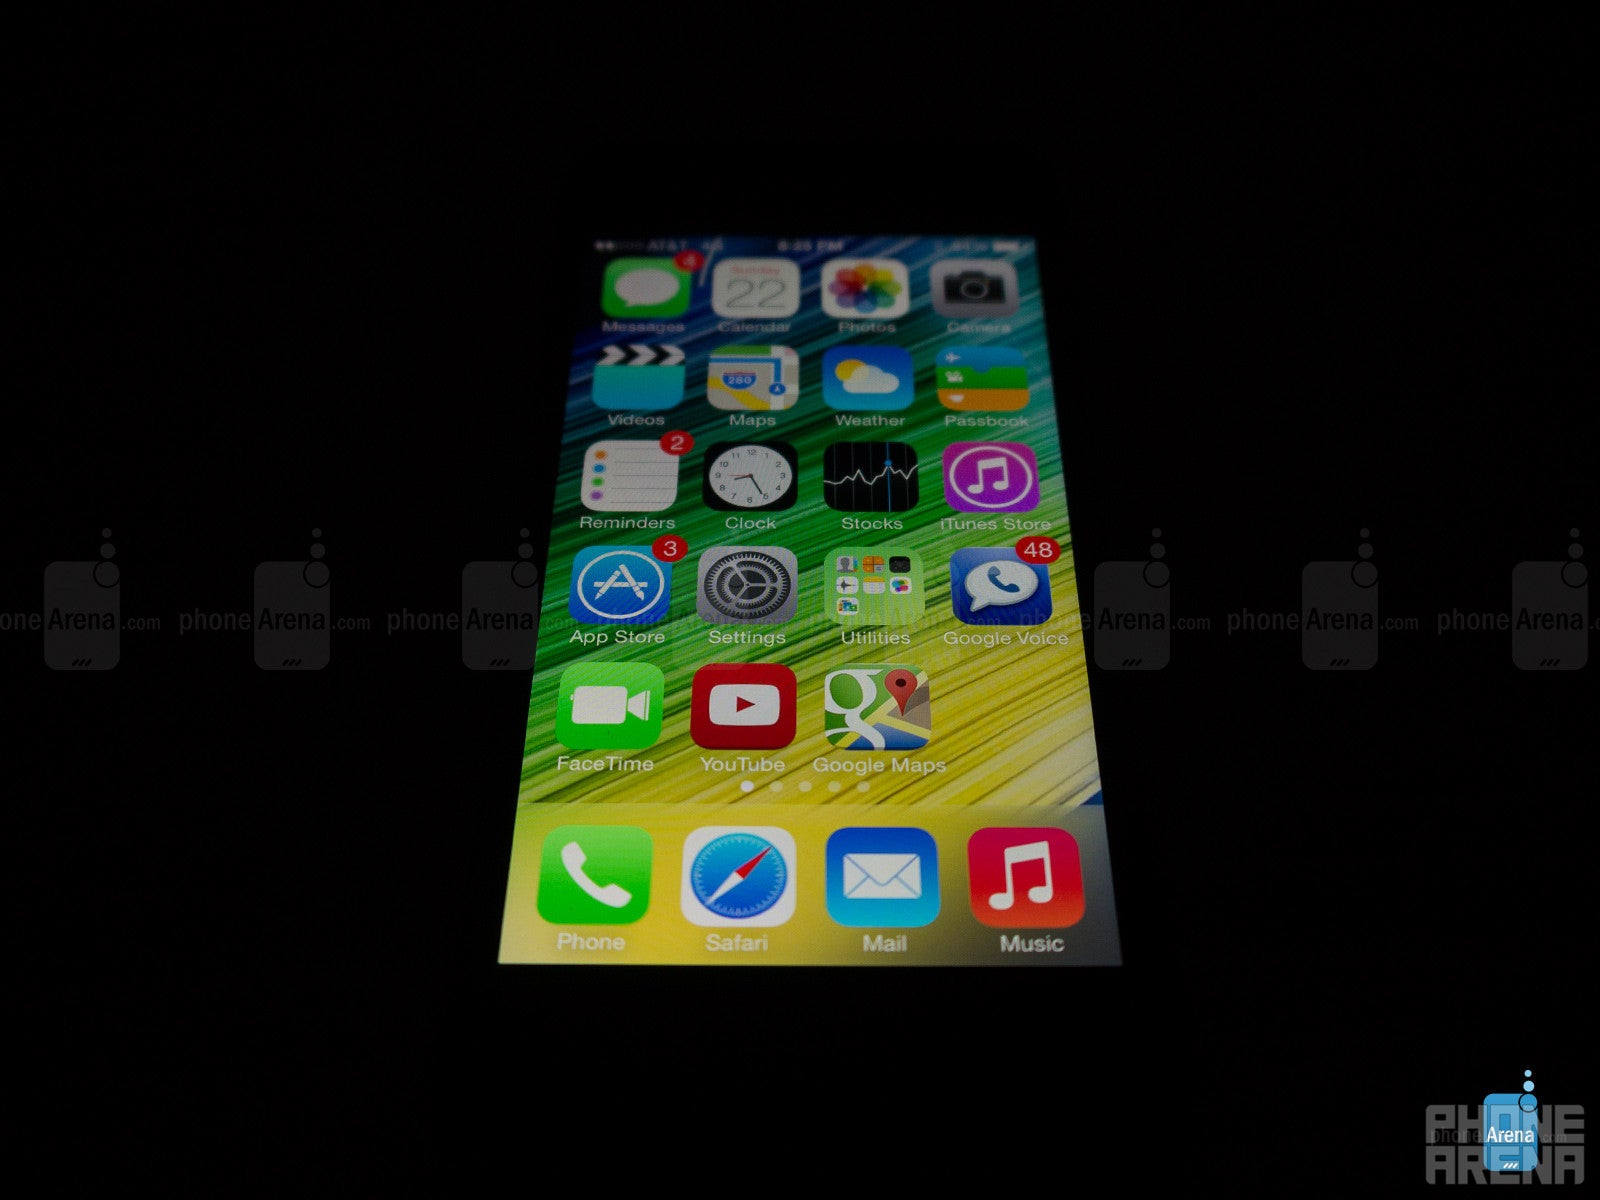 Apple iPhone 5c Review